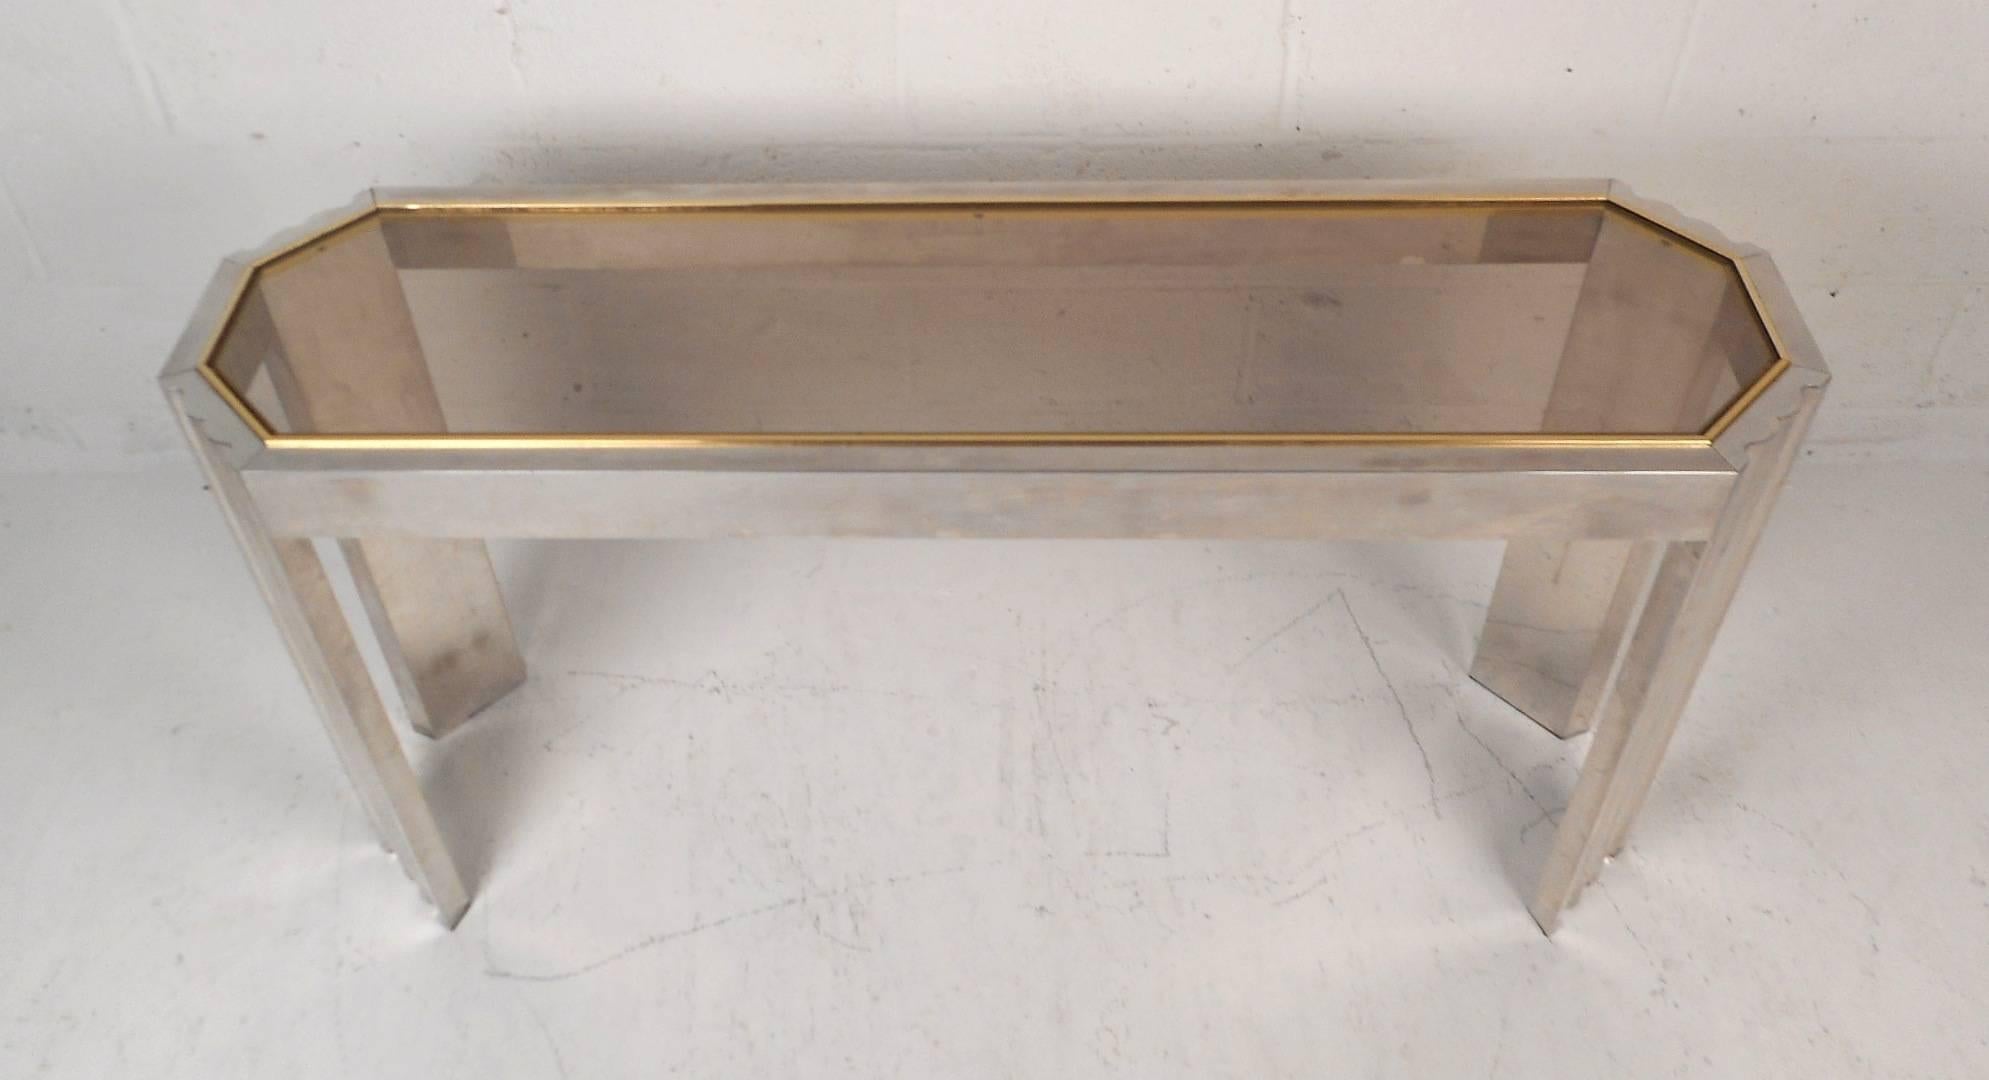 This beautiful vintage modern hall table features a smoked glass top with brass trim running along the edges. Sleek design has unique legs with louvered indents running vertically and bevelled sides. This eight sided mid-century table is versatile